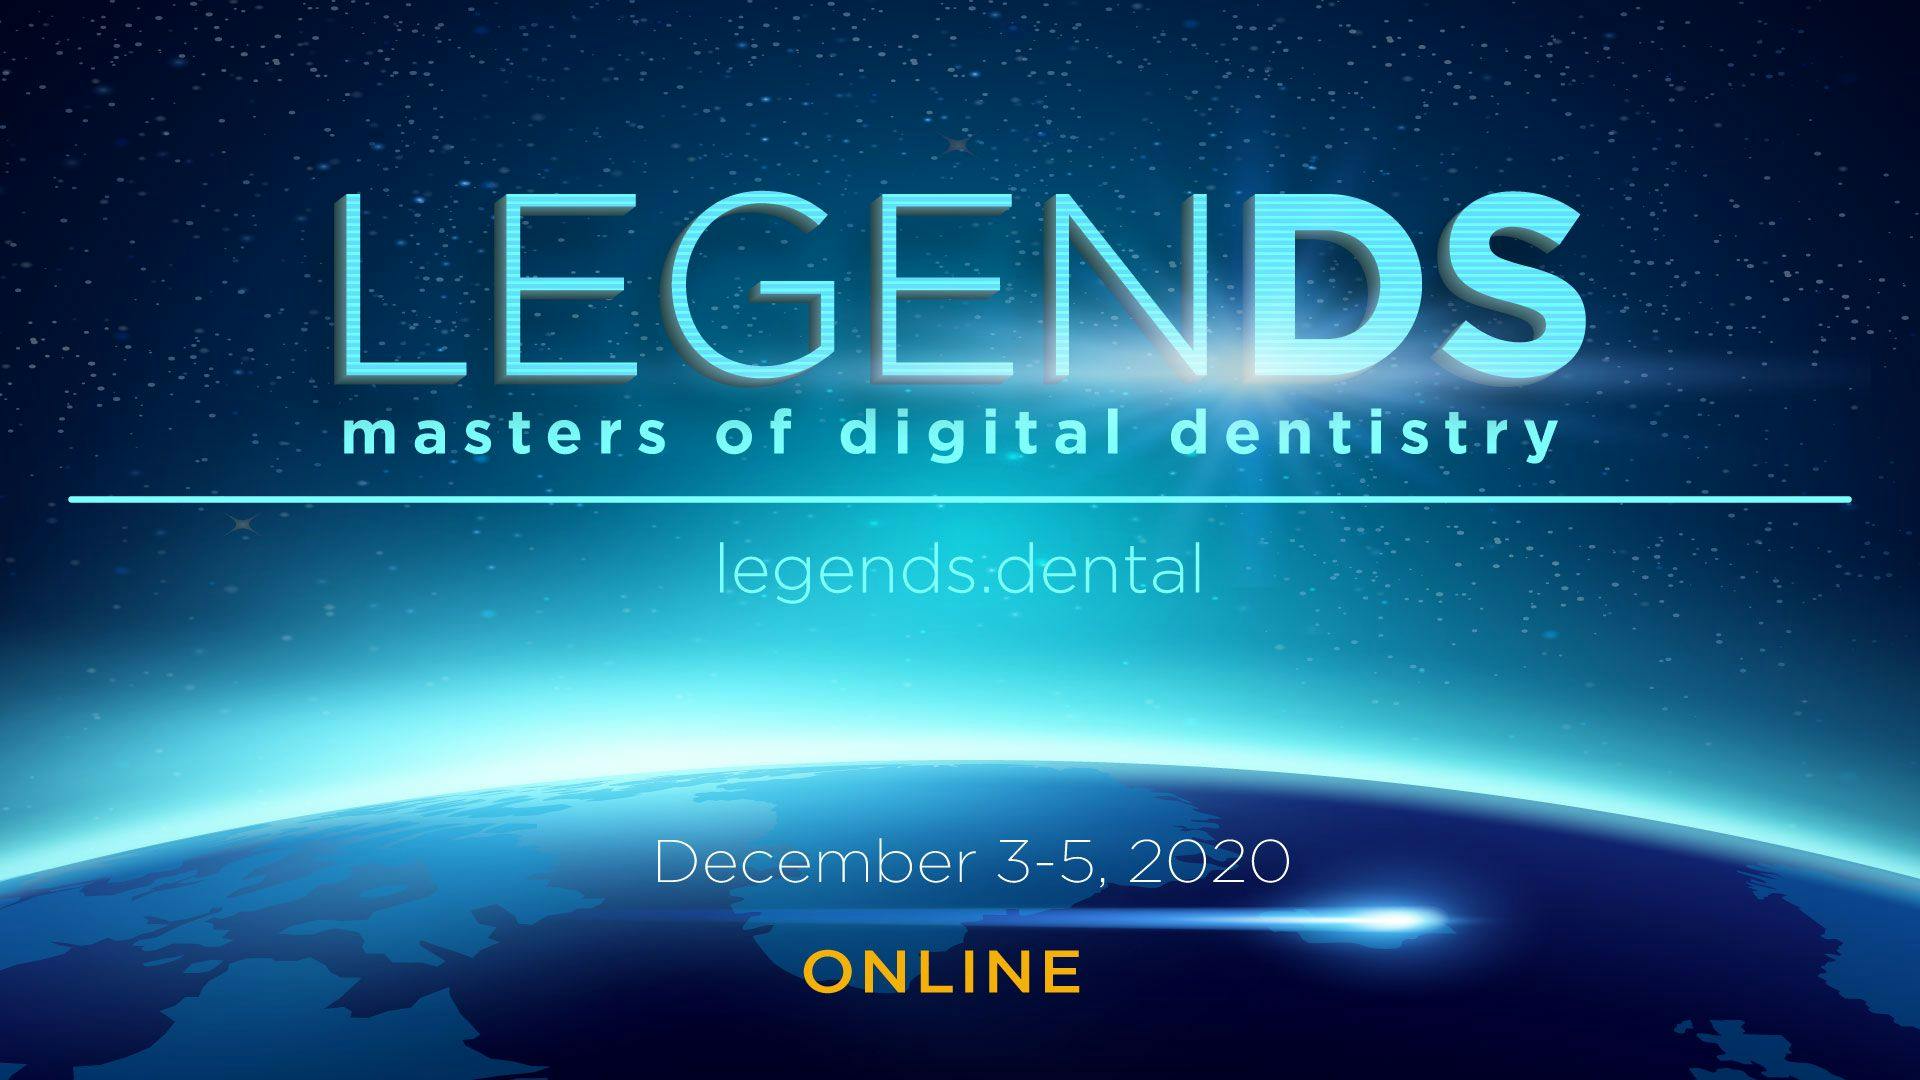 From December 3rd to 5th, 2020, CEREC enthusiasts can learn from top-class masters of digital dentistry at the three-day global online meeting Legends. 